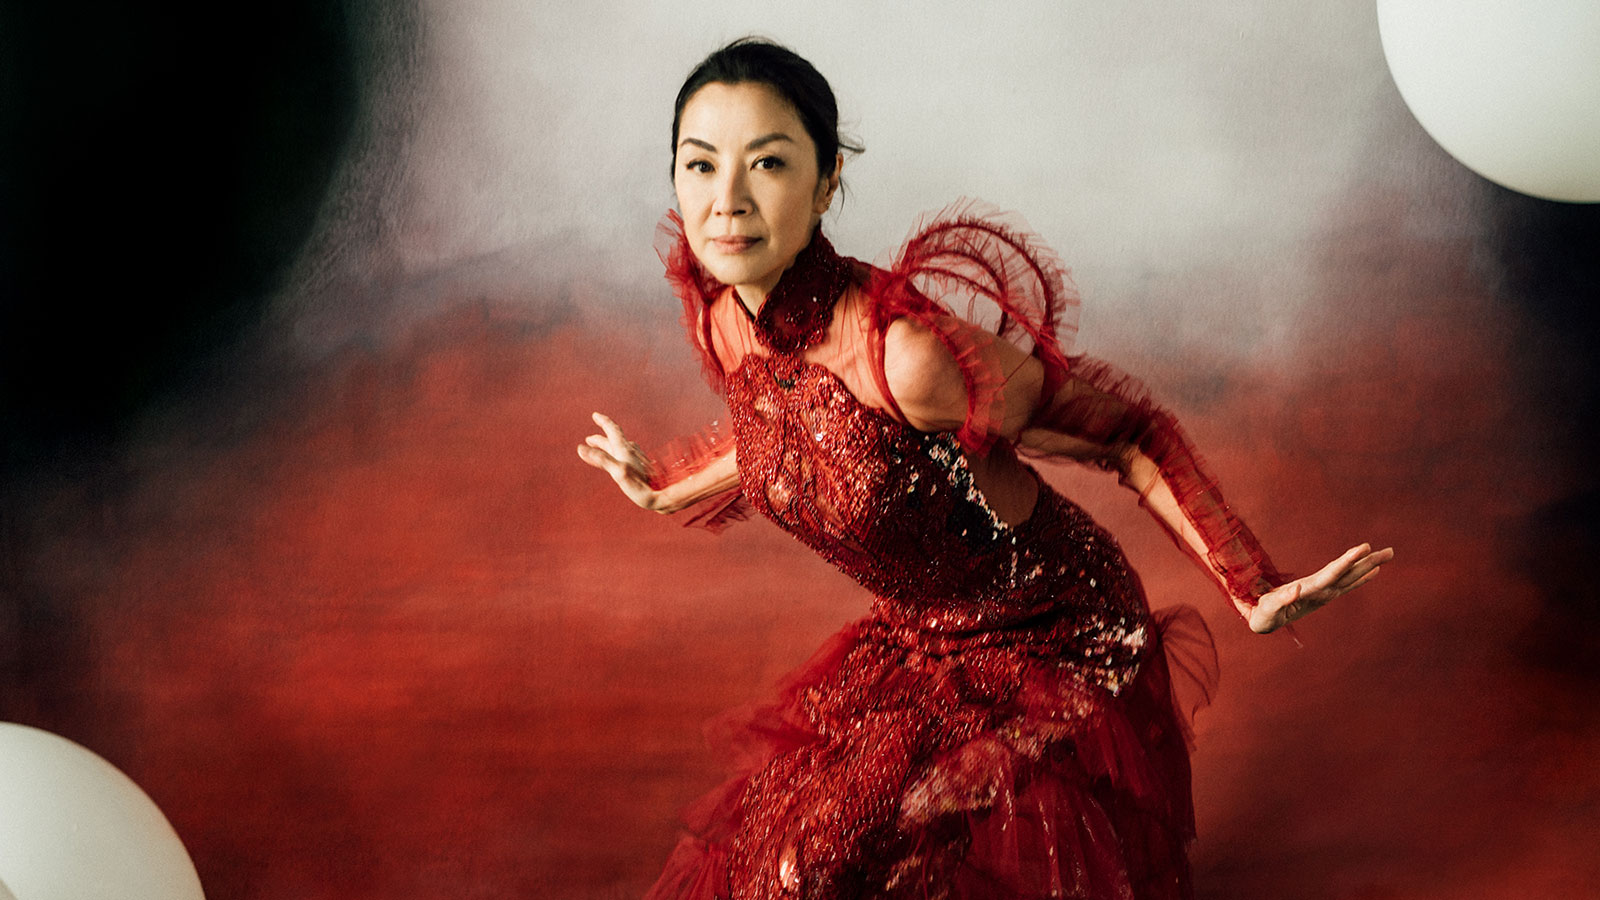 Michelle Yeoh Is on the 2022 TIME 100 List